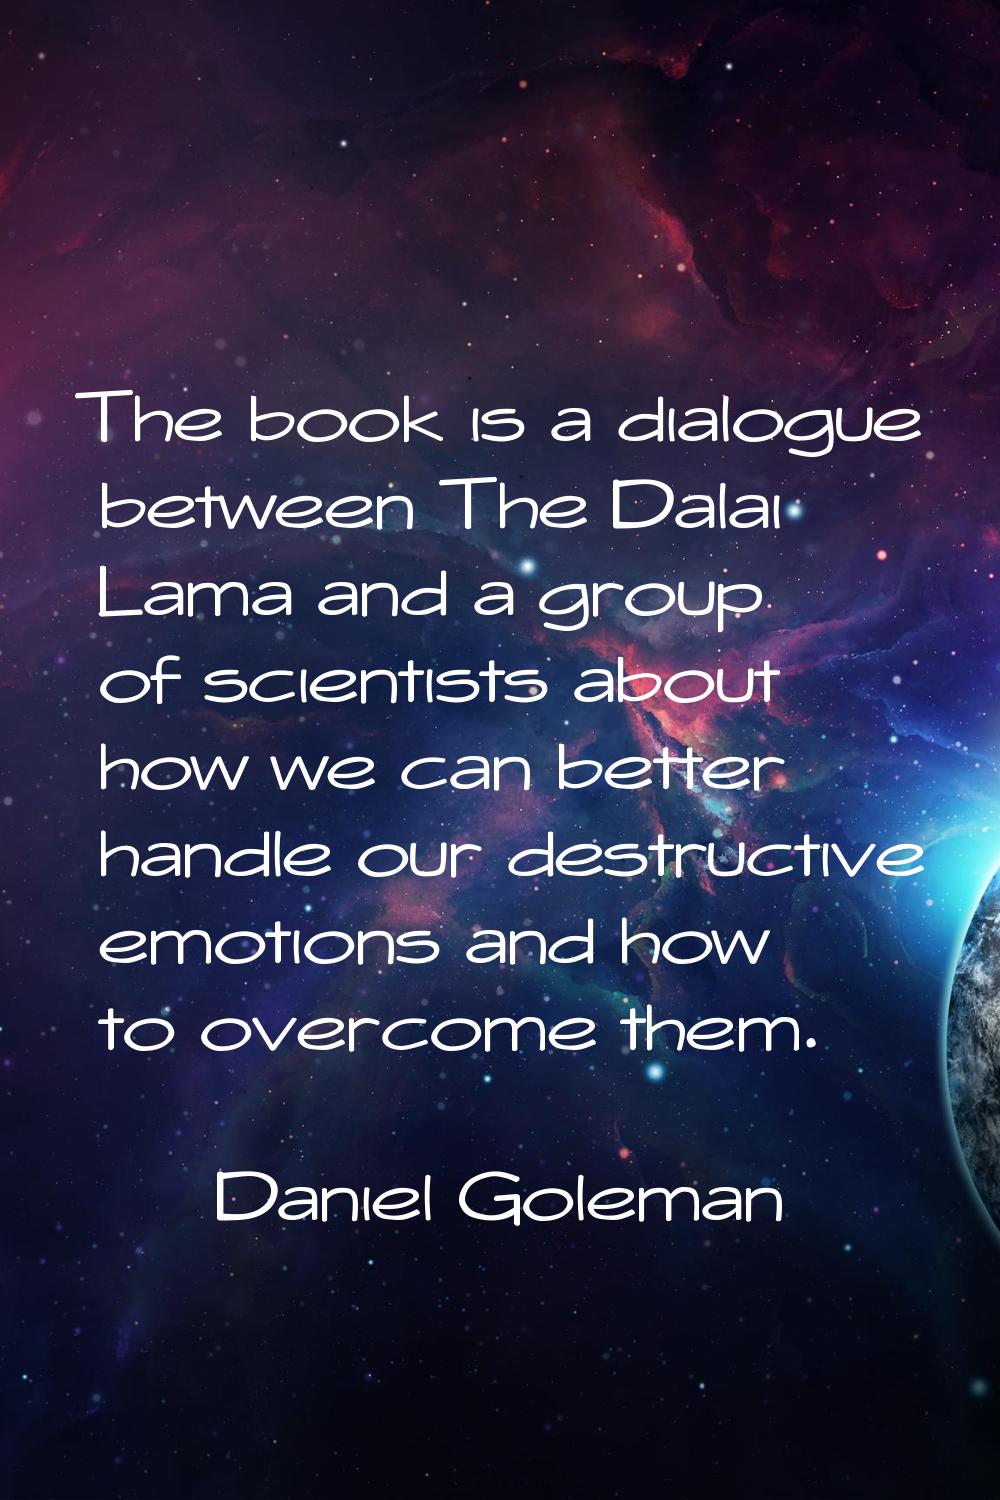 The book is a dialogue between The Dalai Lama and a group of scientists about how we can better han